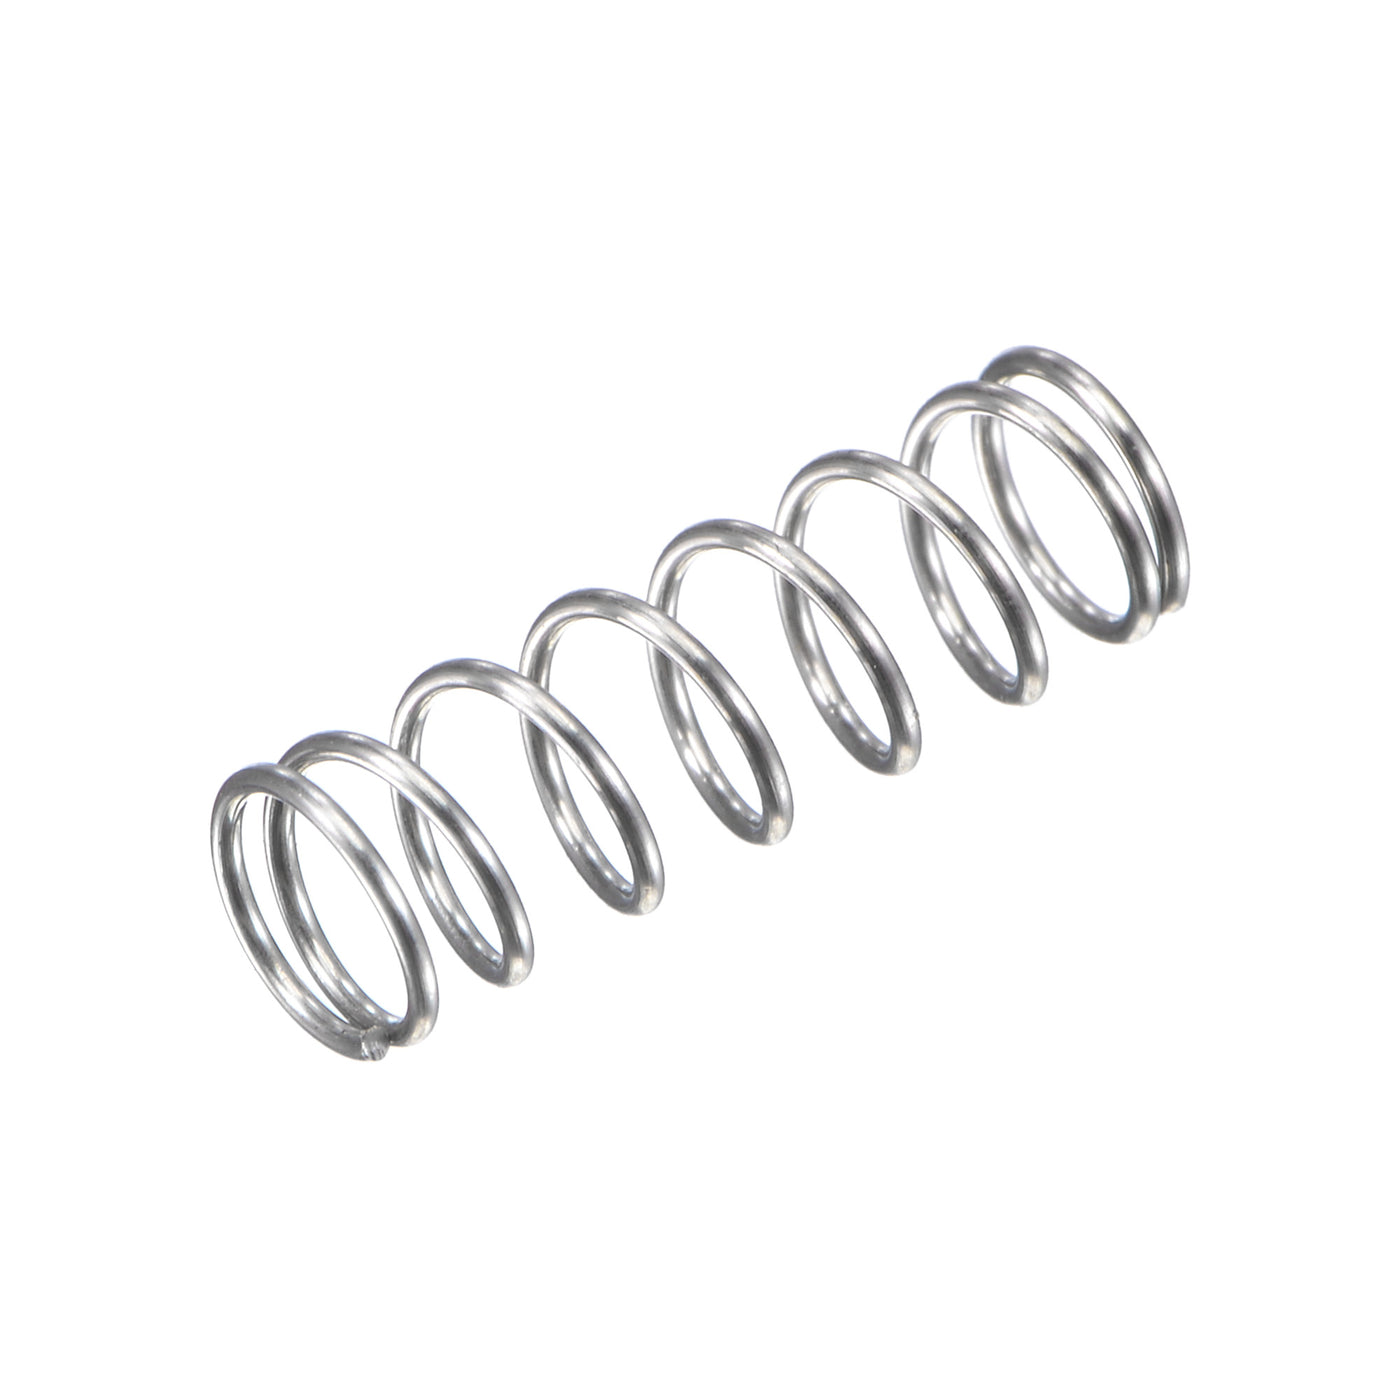 uxcell Uxcell 5mmx0.5mmx15mm 304 Stainless Steel Compression Spring 5.9N Load Capacity 20pcs